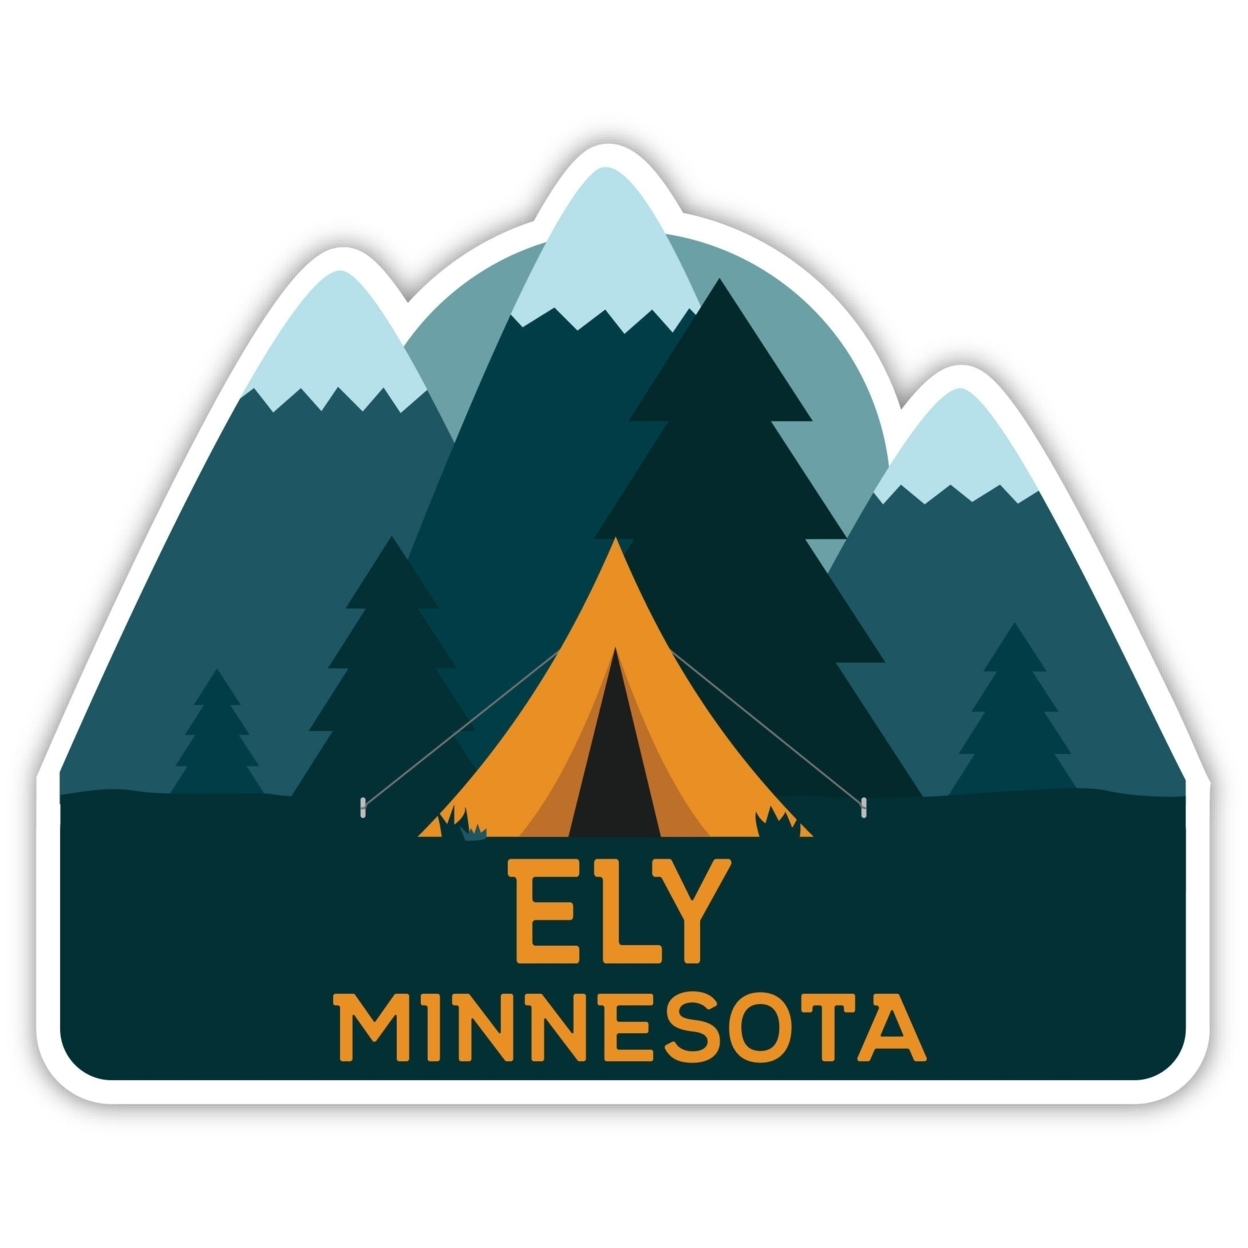 Ely Minnesota Souvenir Decorative Stickers (Choose Theme And Size) - 4-Pack, 2-Inch, Tent